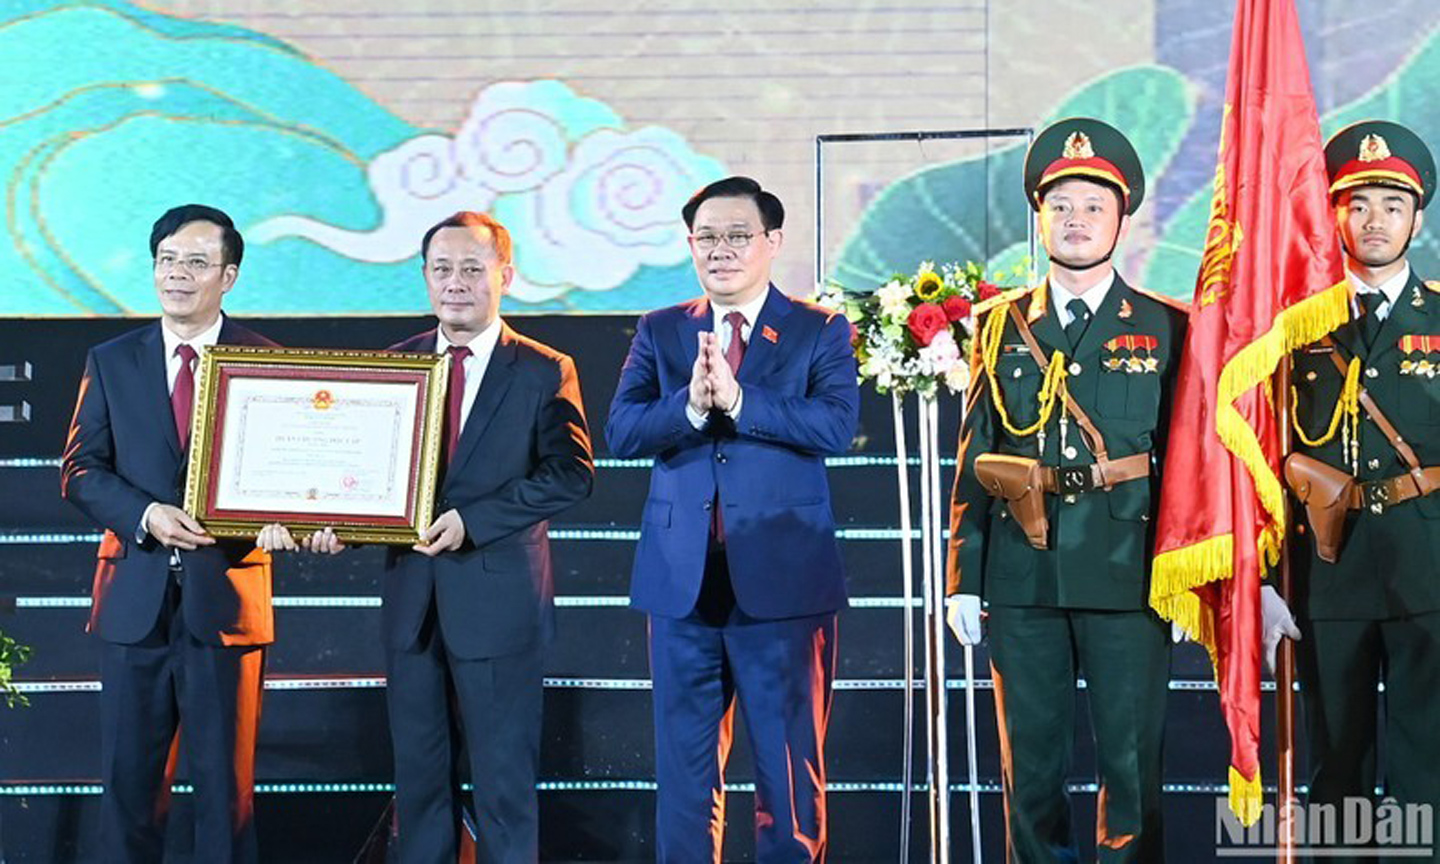 ABO/NDO- Vinh, the capital city of Nghe An Province, celebrated the 60th anniversary of its establishment at a ceremony on September 30 in the presence of National Assembly Chairman Vuong Dinh Hue.